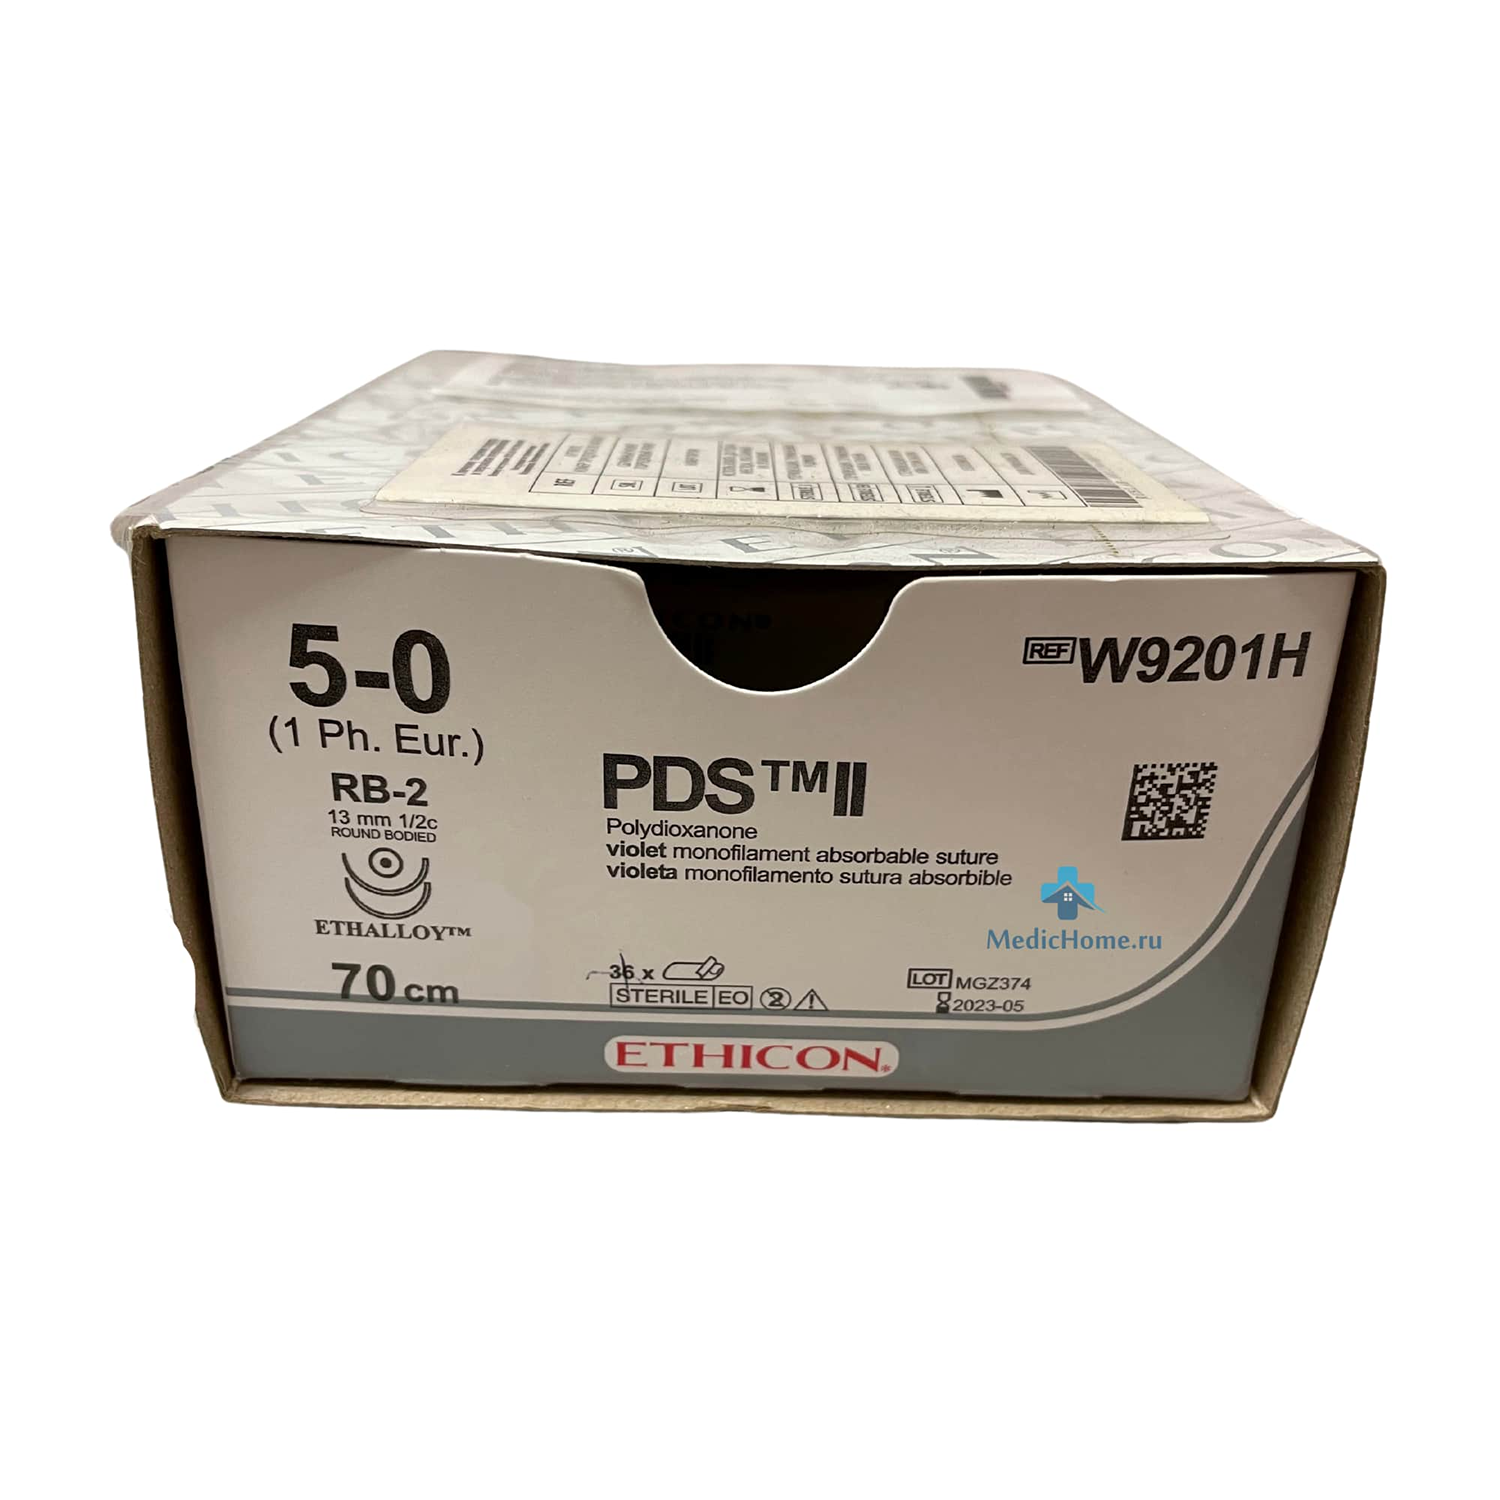 Ethicon PDS ll Sutures | Absorbable  | Violet | Size: 5-0 | Length: 70 | Needle: RB-2 | Pack of 36 (1)